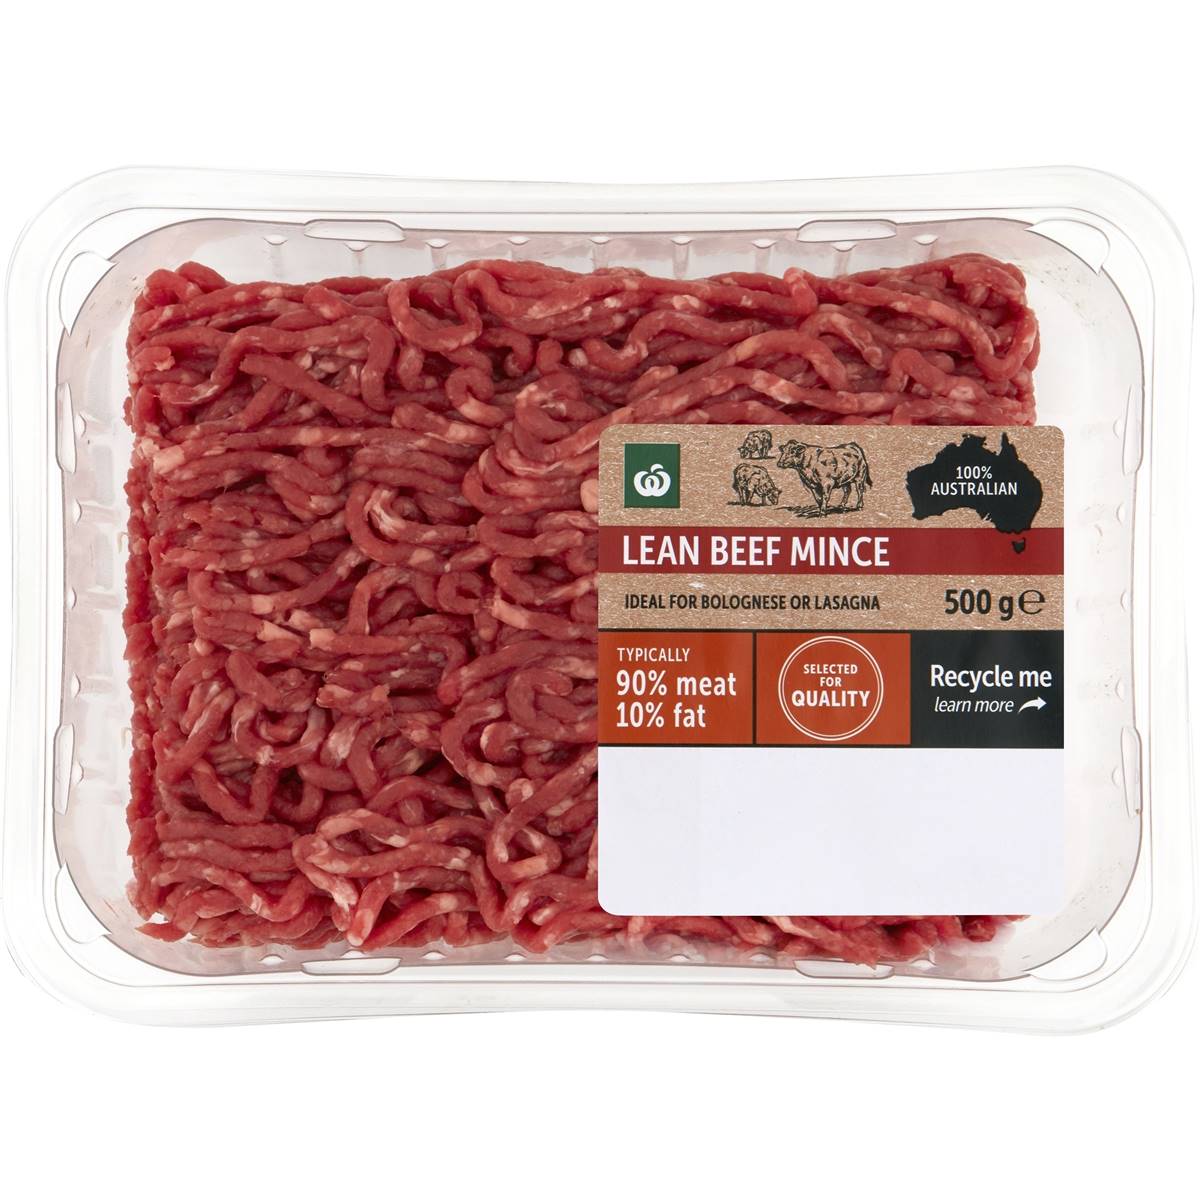 Calories in Woolworths Lean Beef Mince